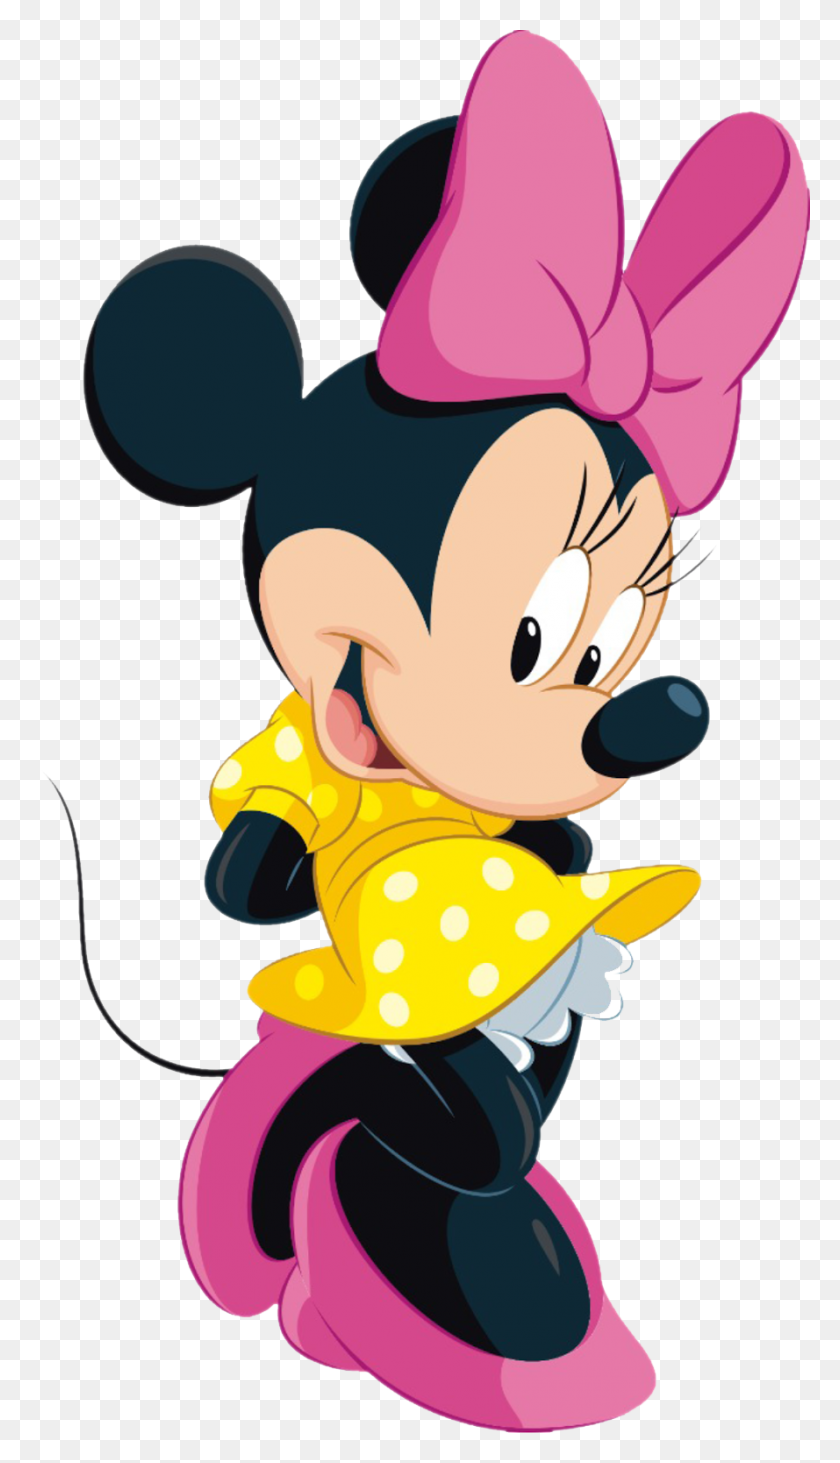 889x1600 Minnie Mouse Png Transparente - Minnie Png